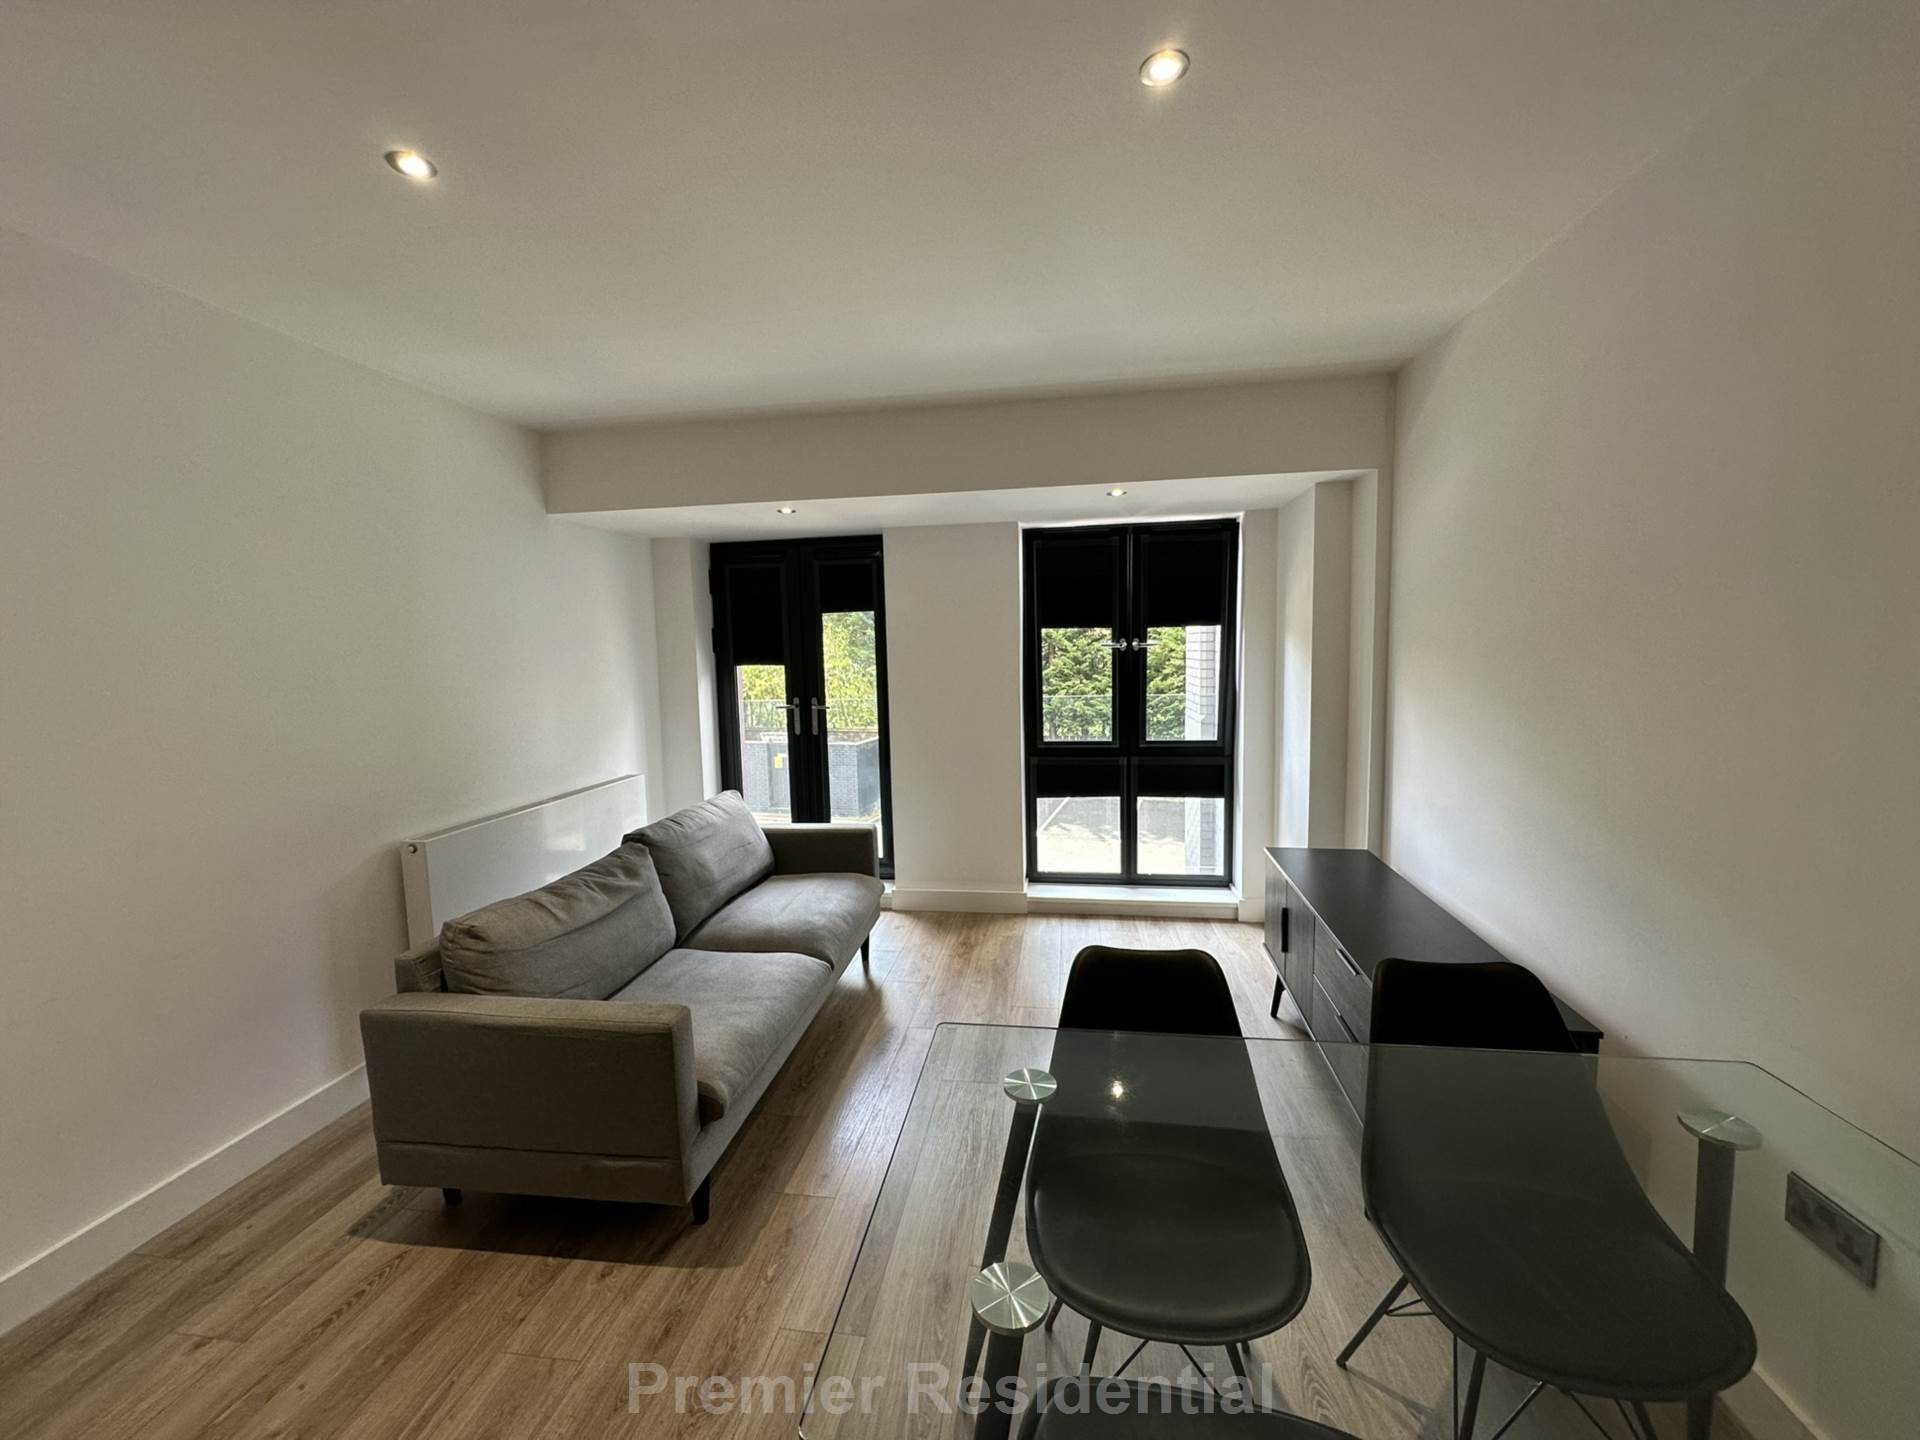 2 bed Apartment for rent in Solihull. From Premier Residential Lettings